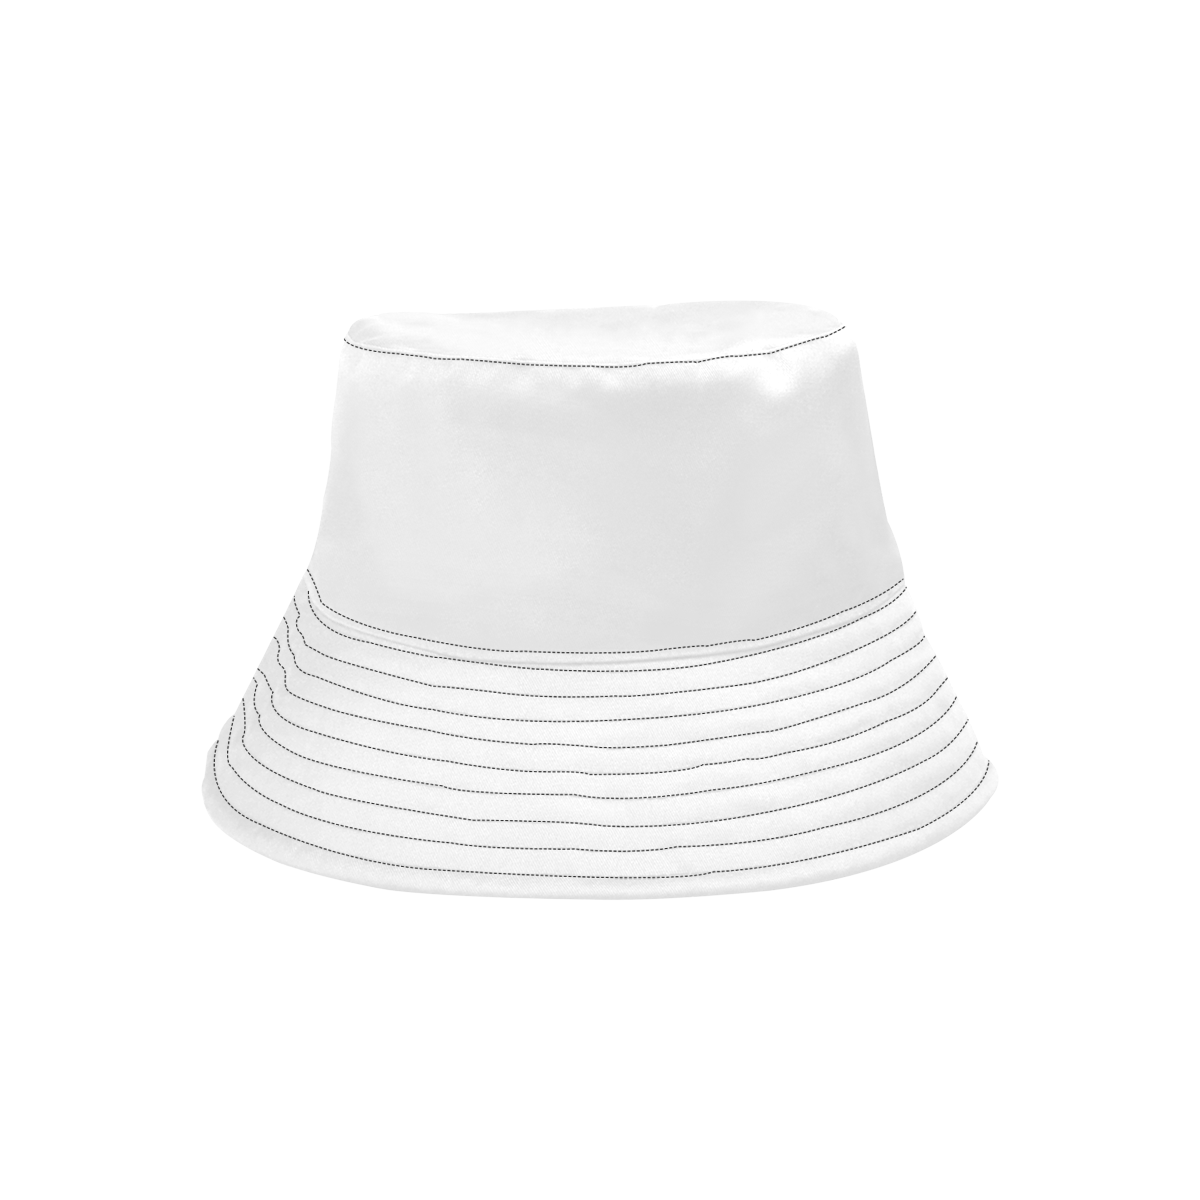 Wonderful Winter White Solid Colored All Over Print Bucket Hat